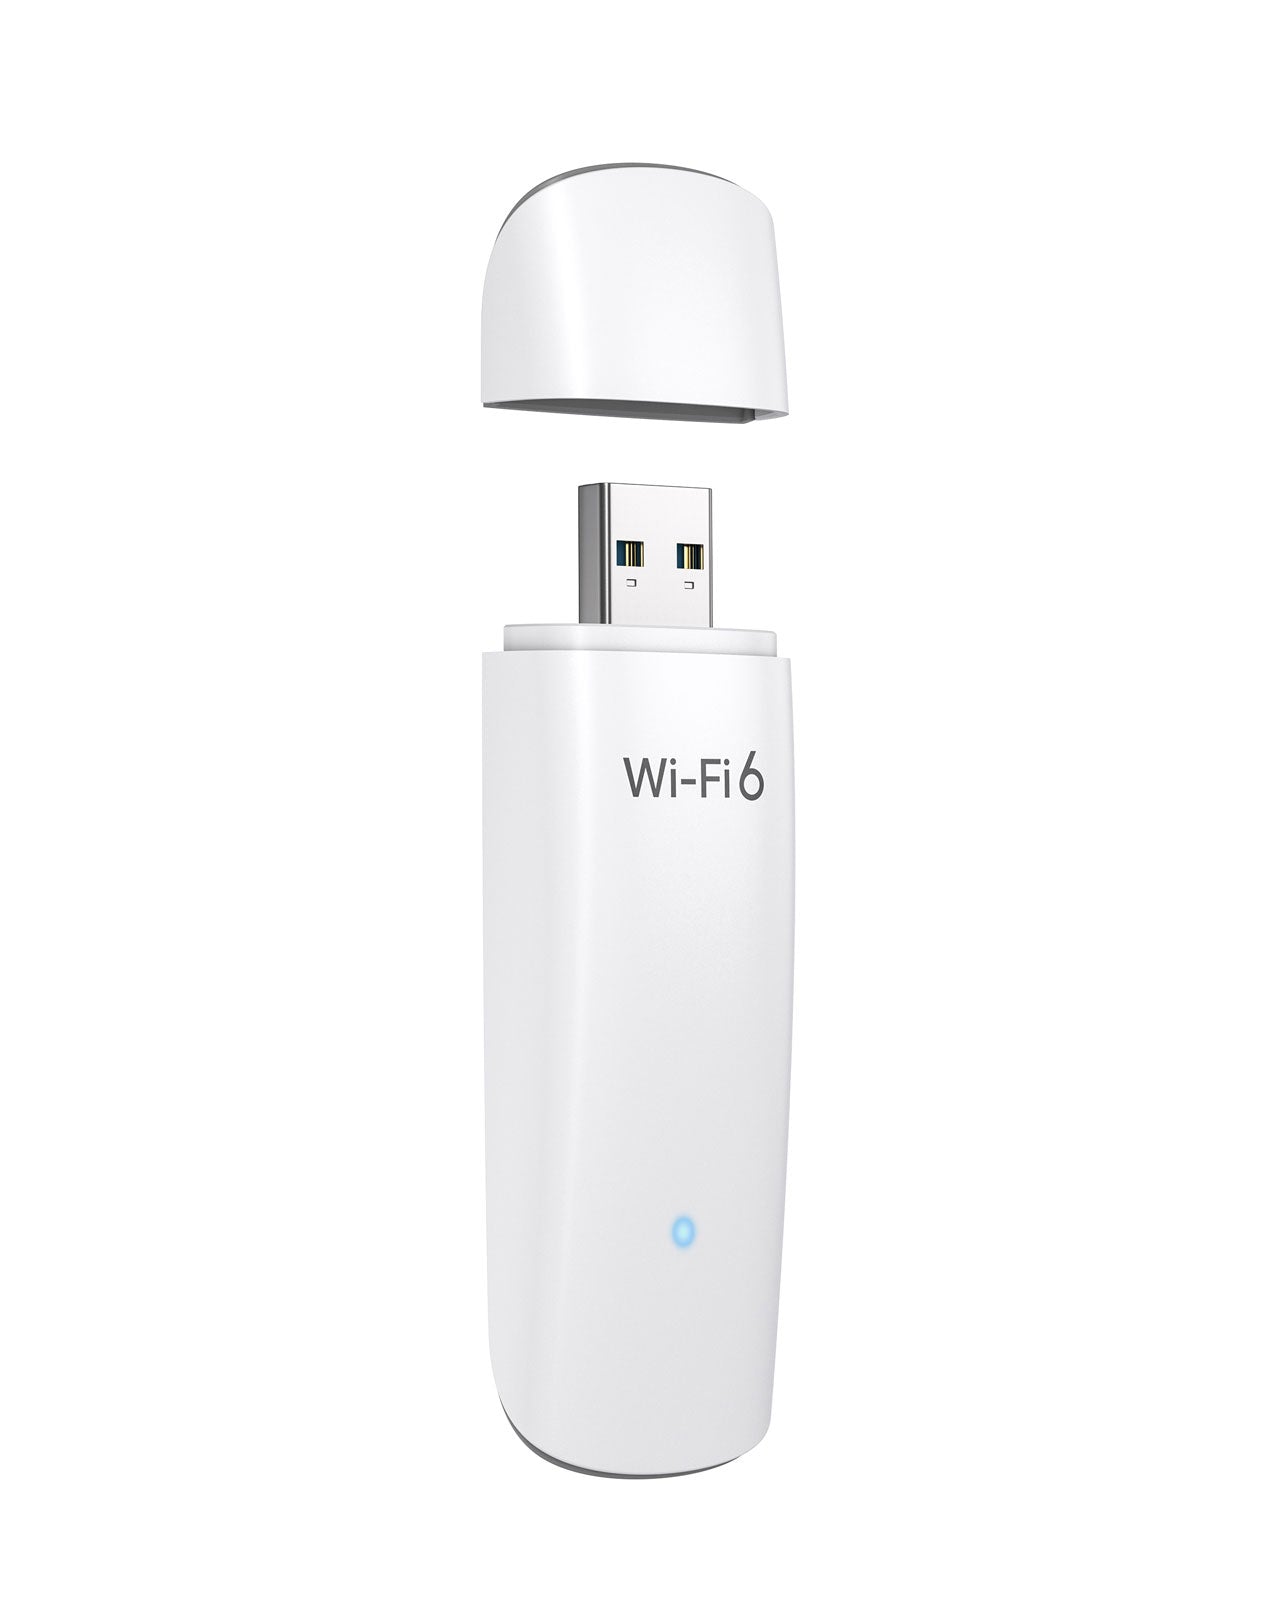 BrosTrend USB WiFi 6 Adapter, 1800Mbps